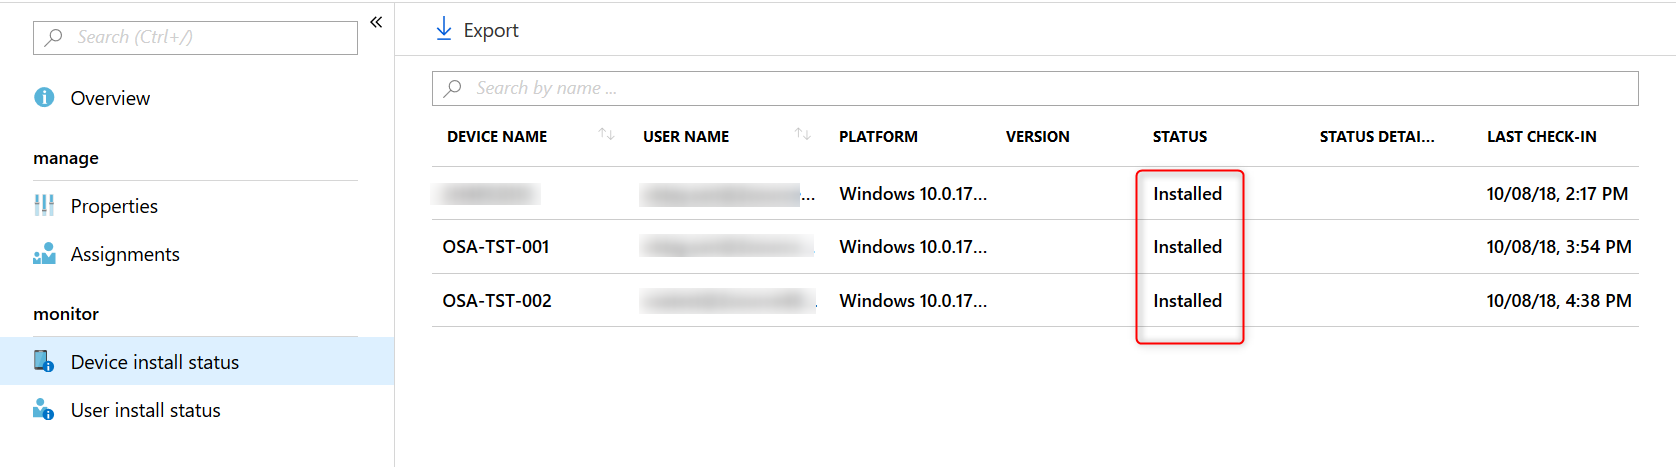 Intune win32 application device install status